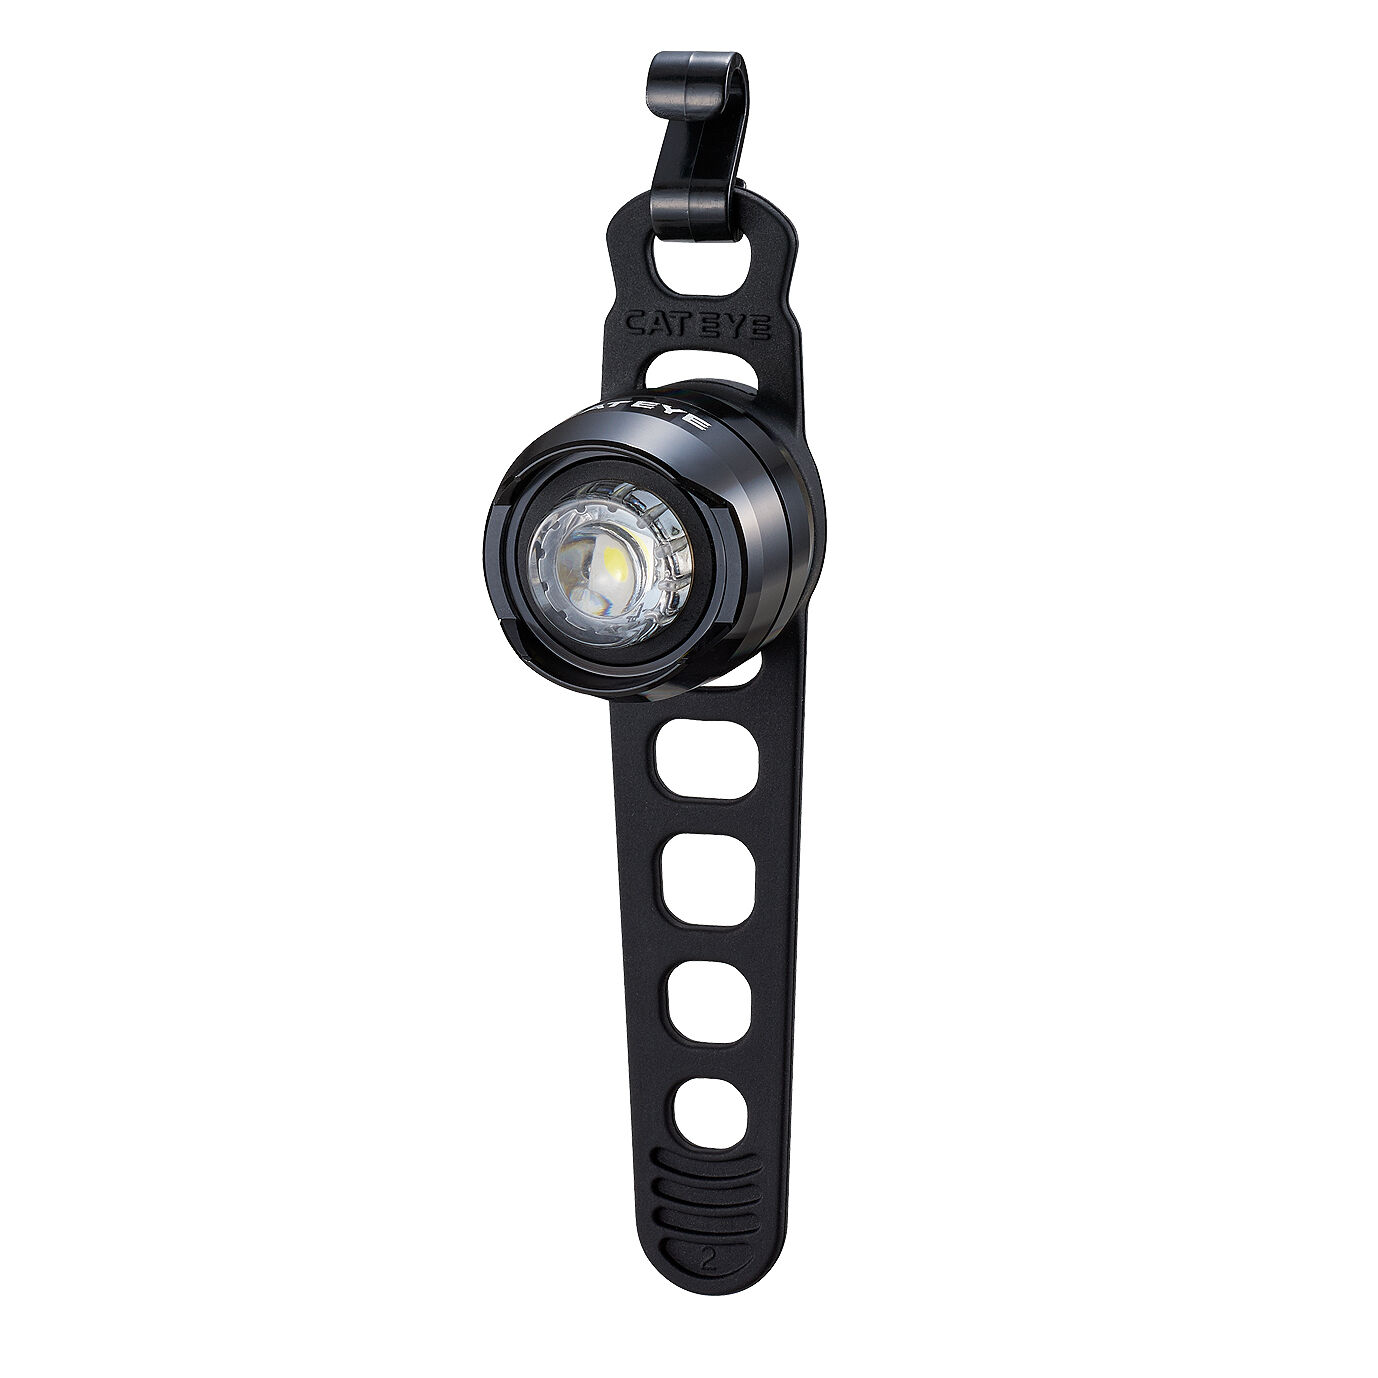 Cateye Orb Rechargeable Front - Luce anteriore per bici | Hardloop